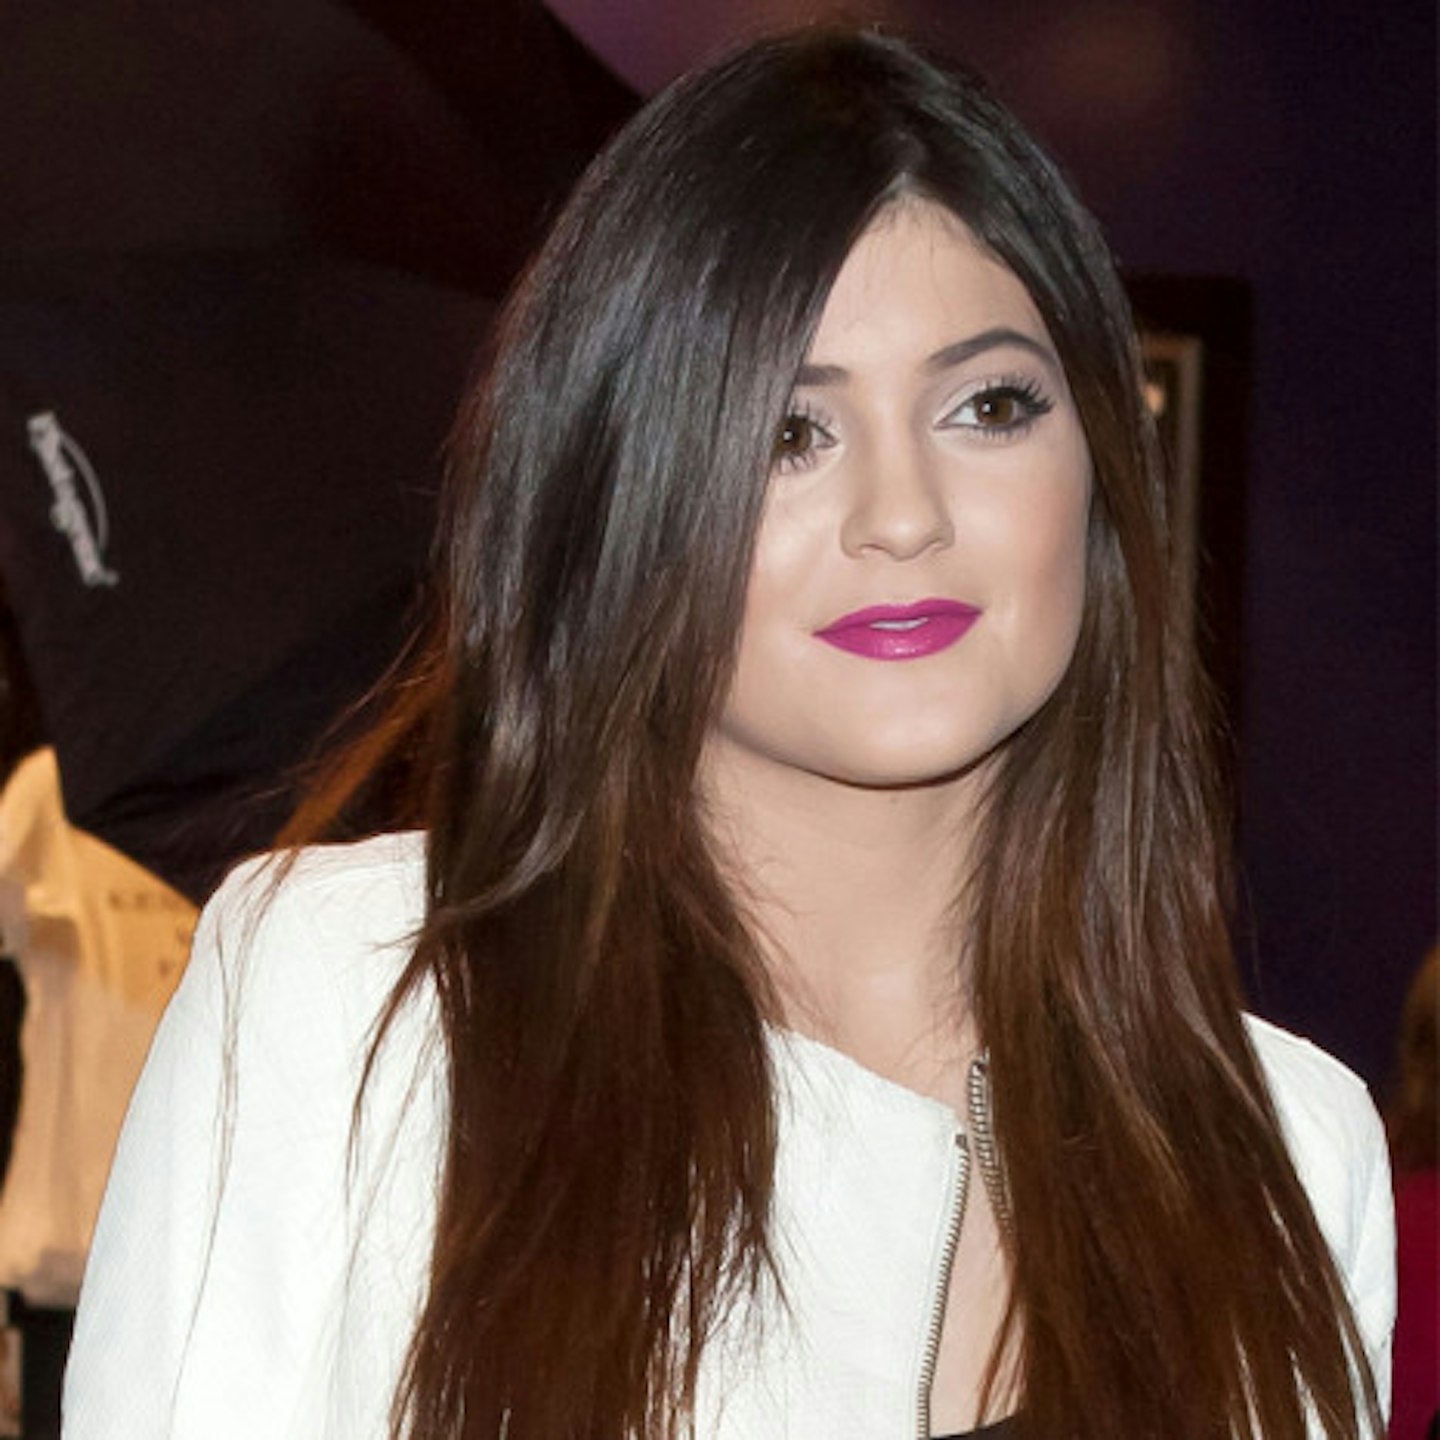 Kylie in 2012